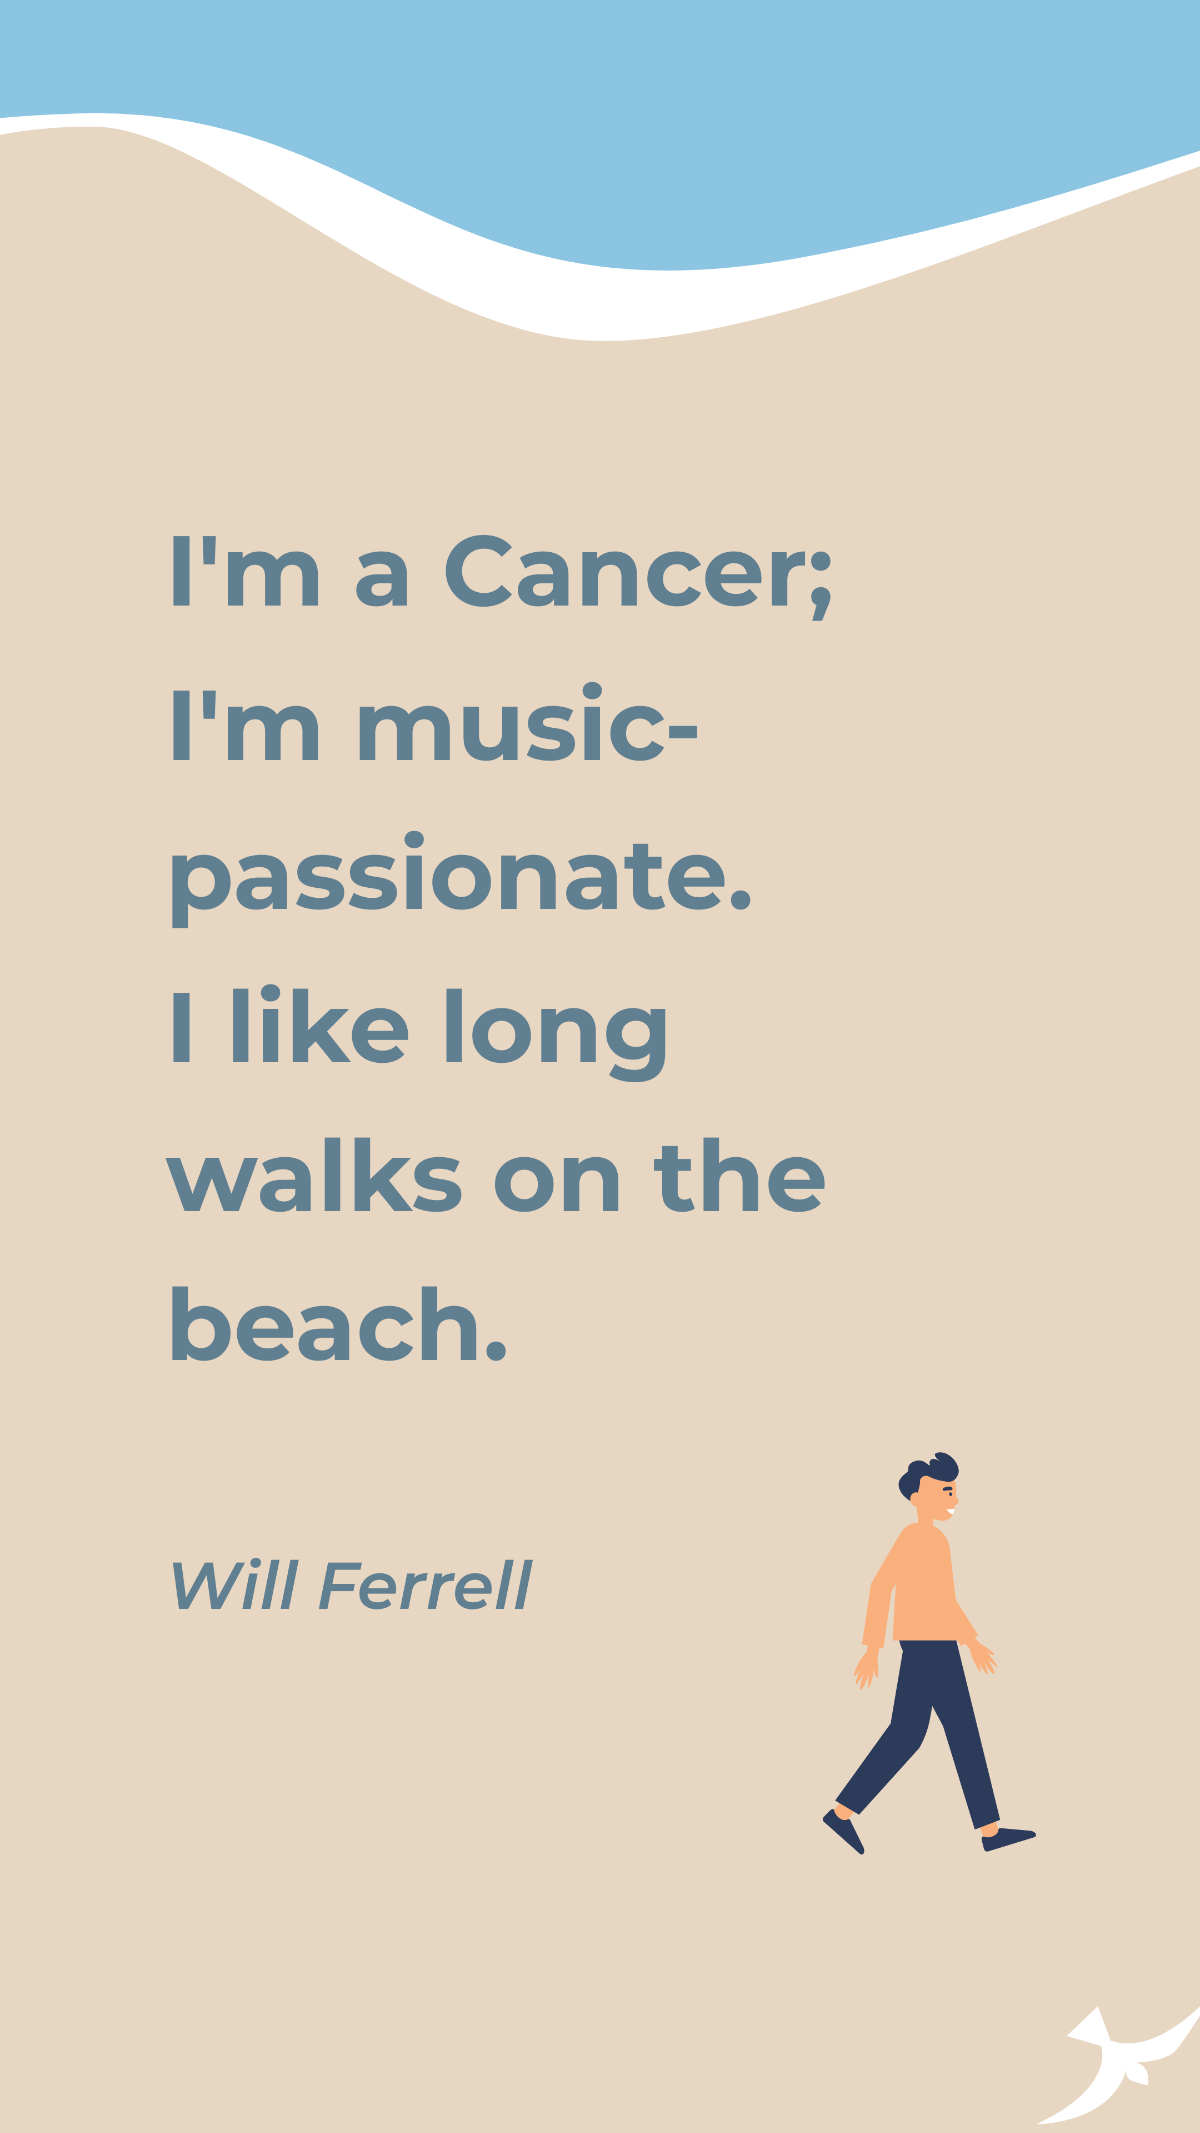 Will Ferrell - I'm a Cancer; I'm music-passionate. I like long walks on the beach. Template